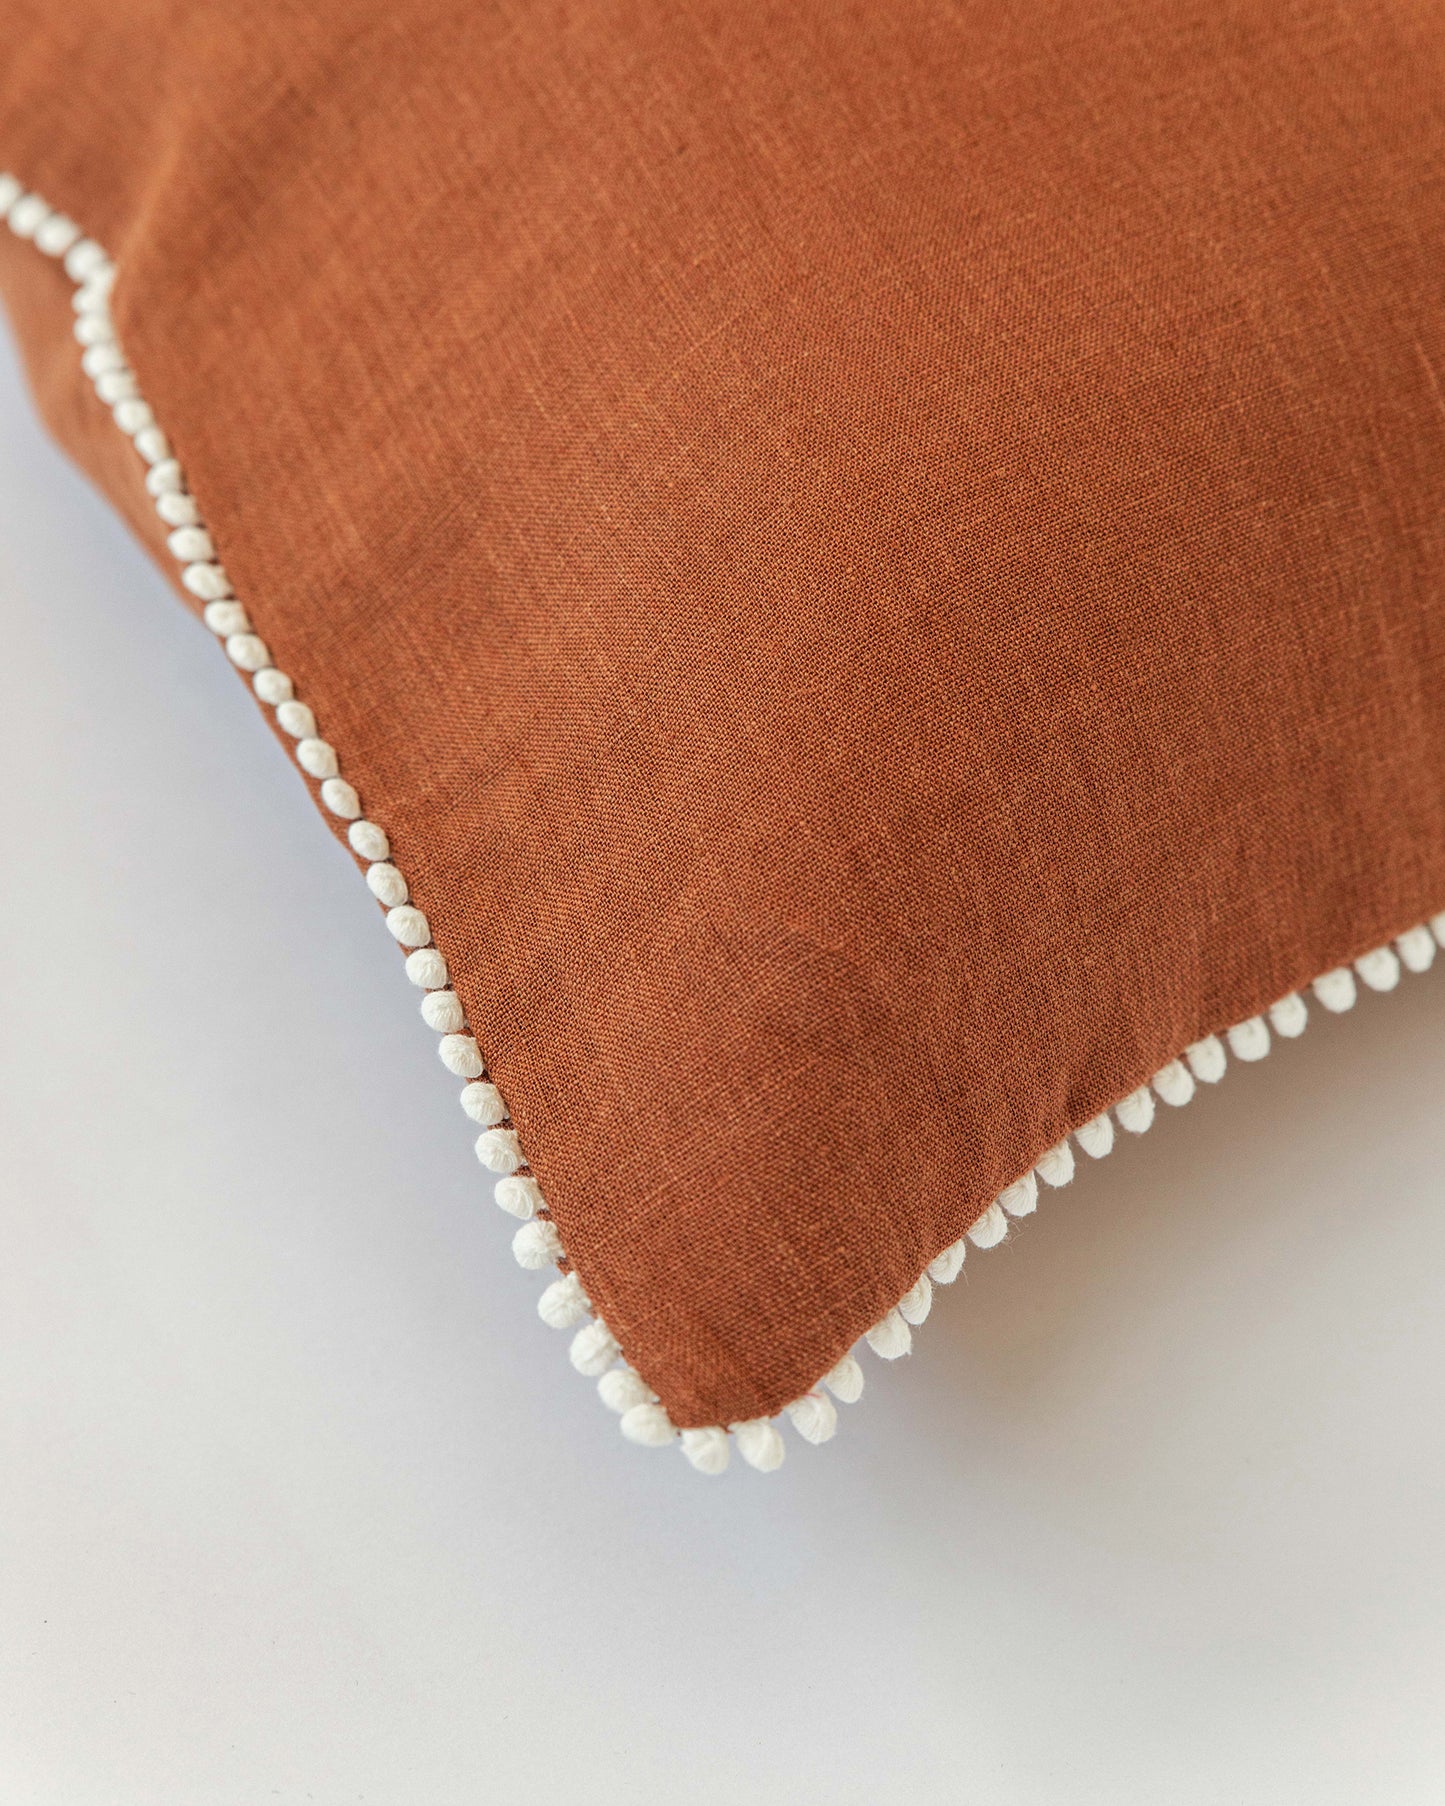 Cushion cover with pom poms in Cinnamon - MagicLinen